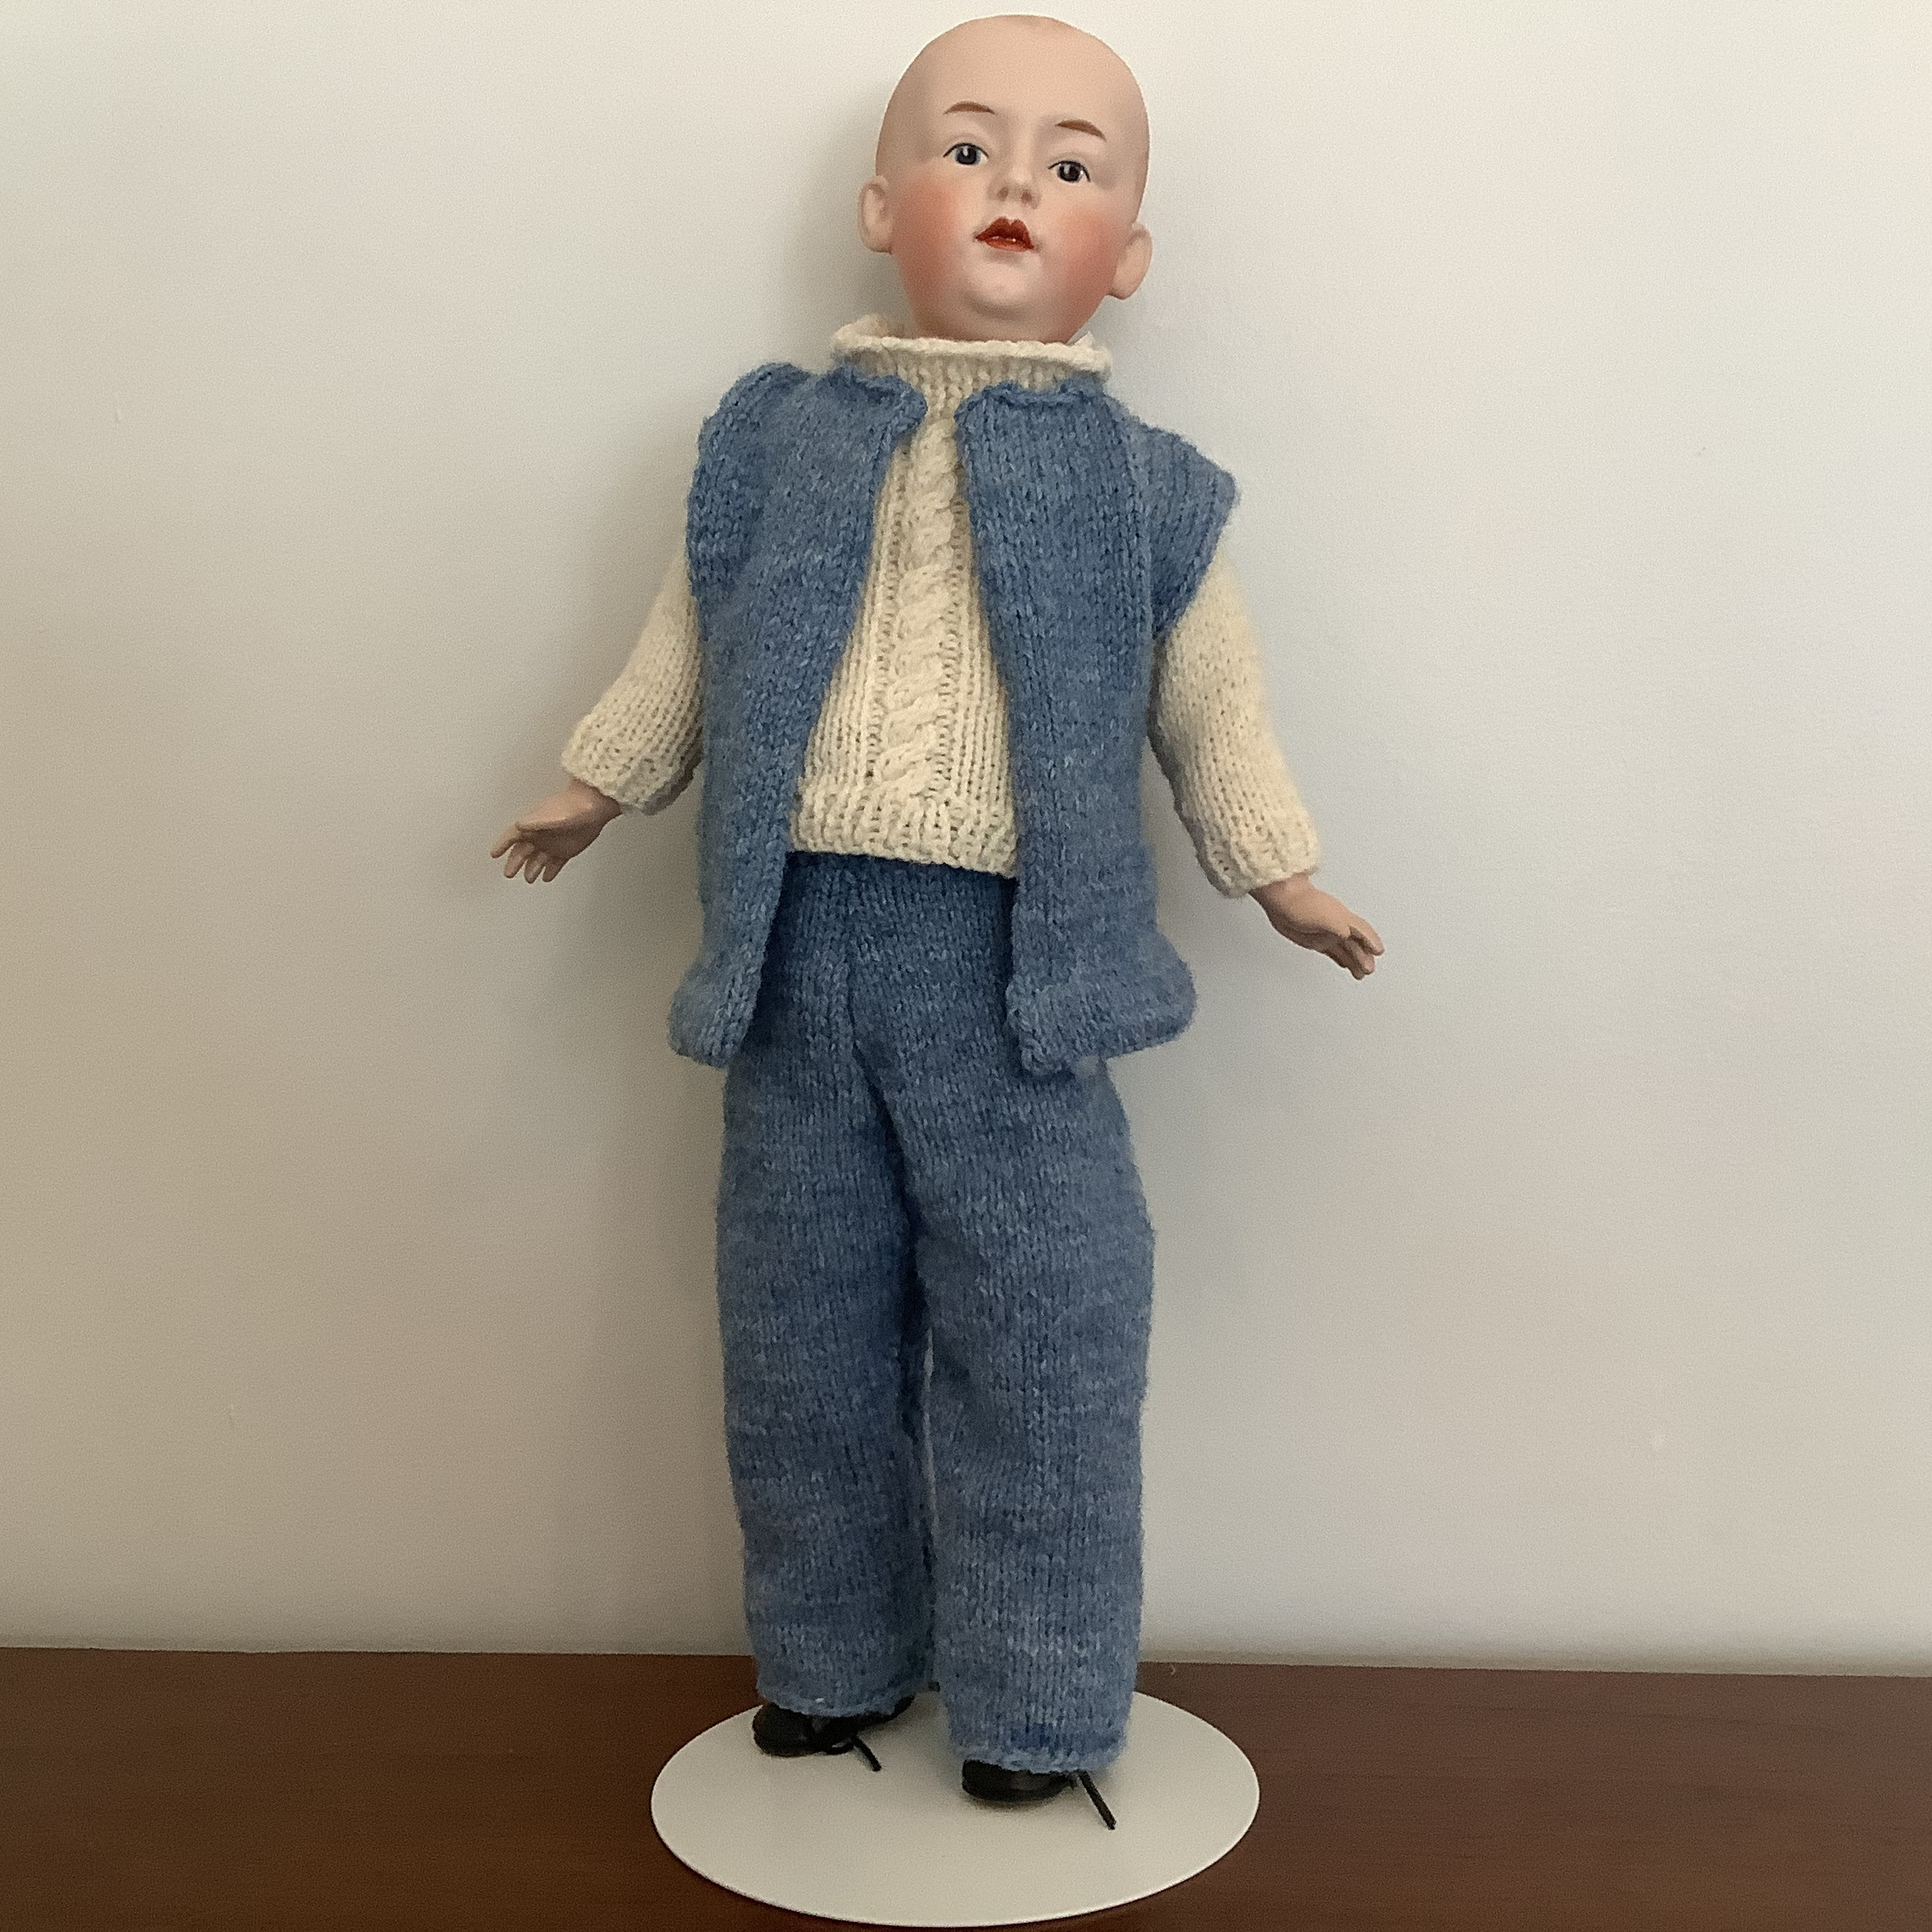 Reproduction Johann doll in blue knit vest and trousers with white cable knit shirt, front view